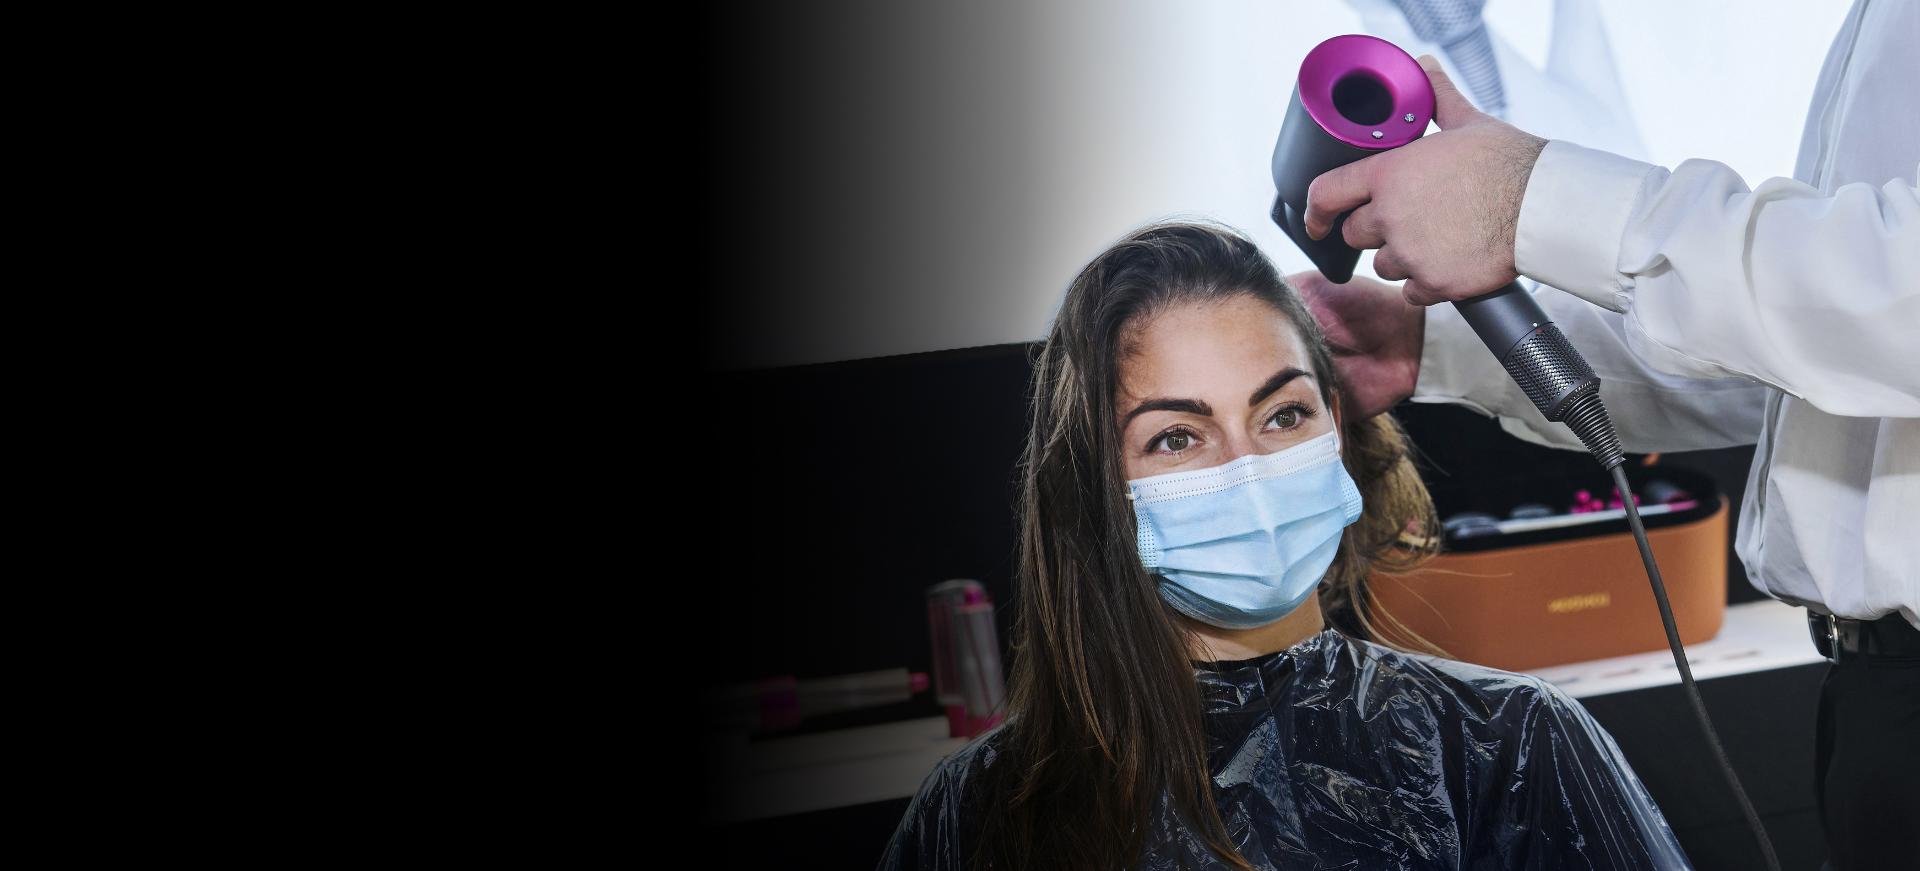 Woman having her hair styled with the Dyson Supersonic hair dryer